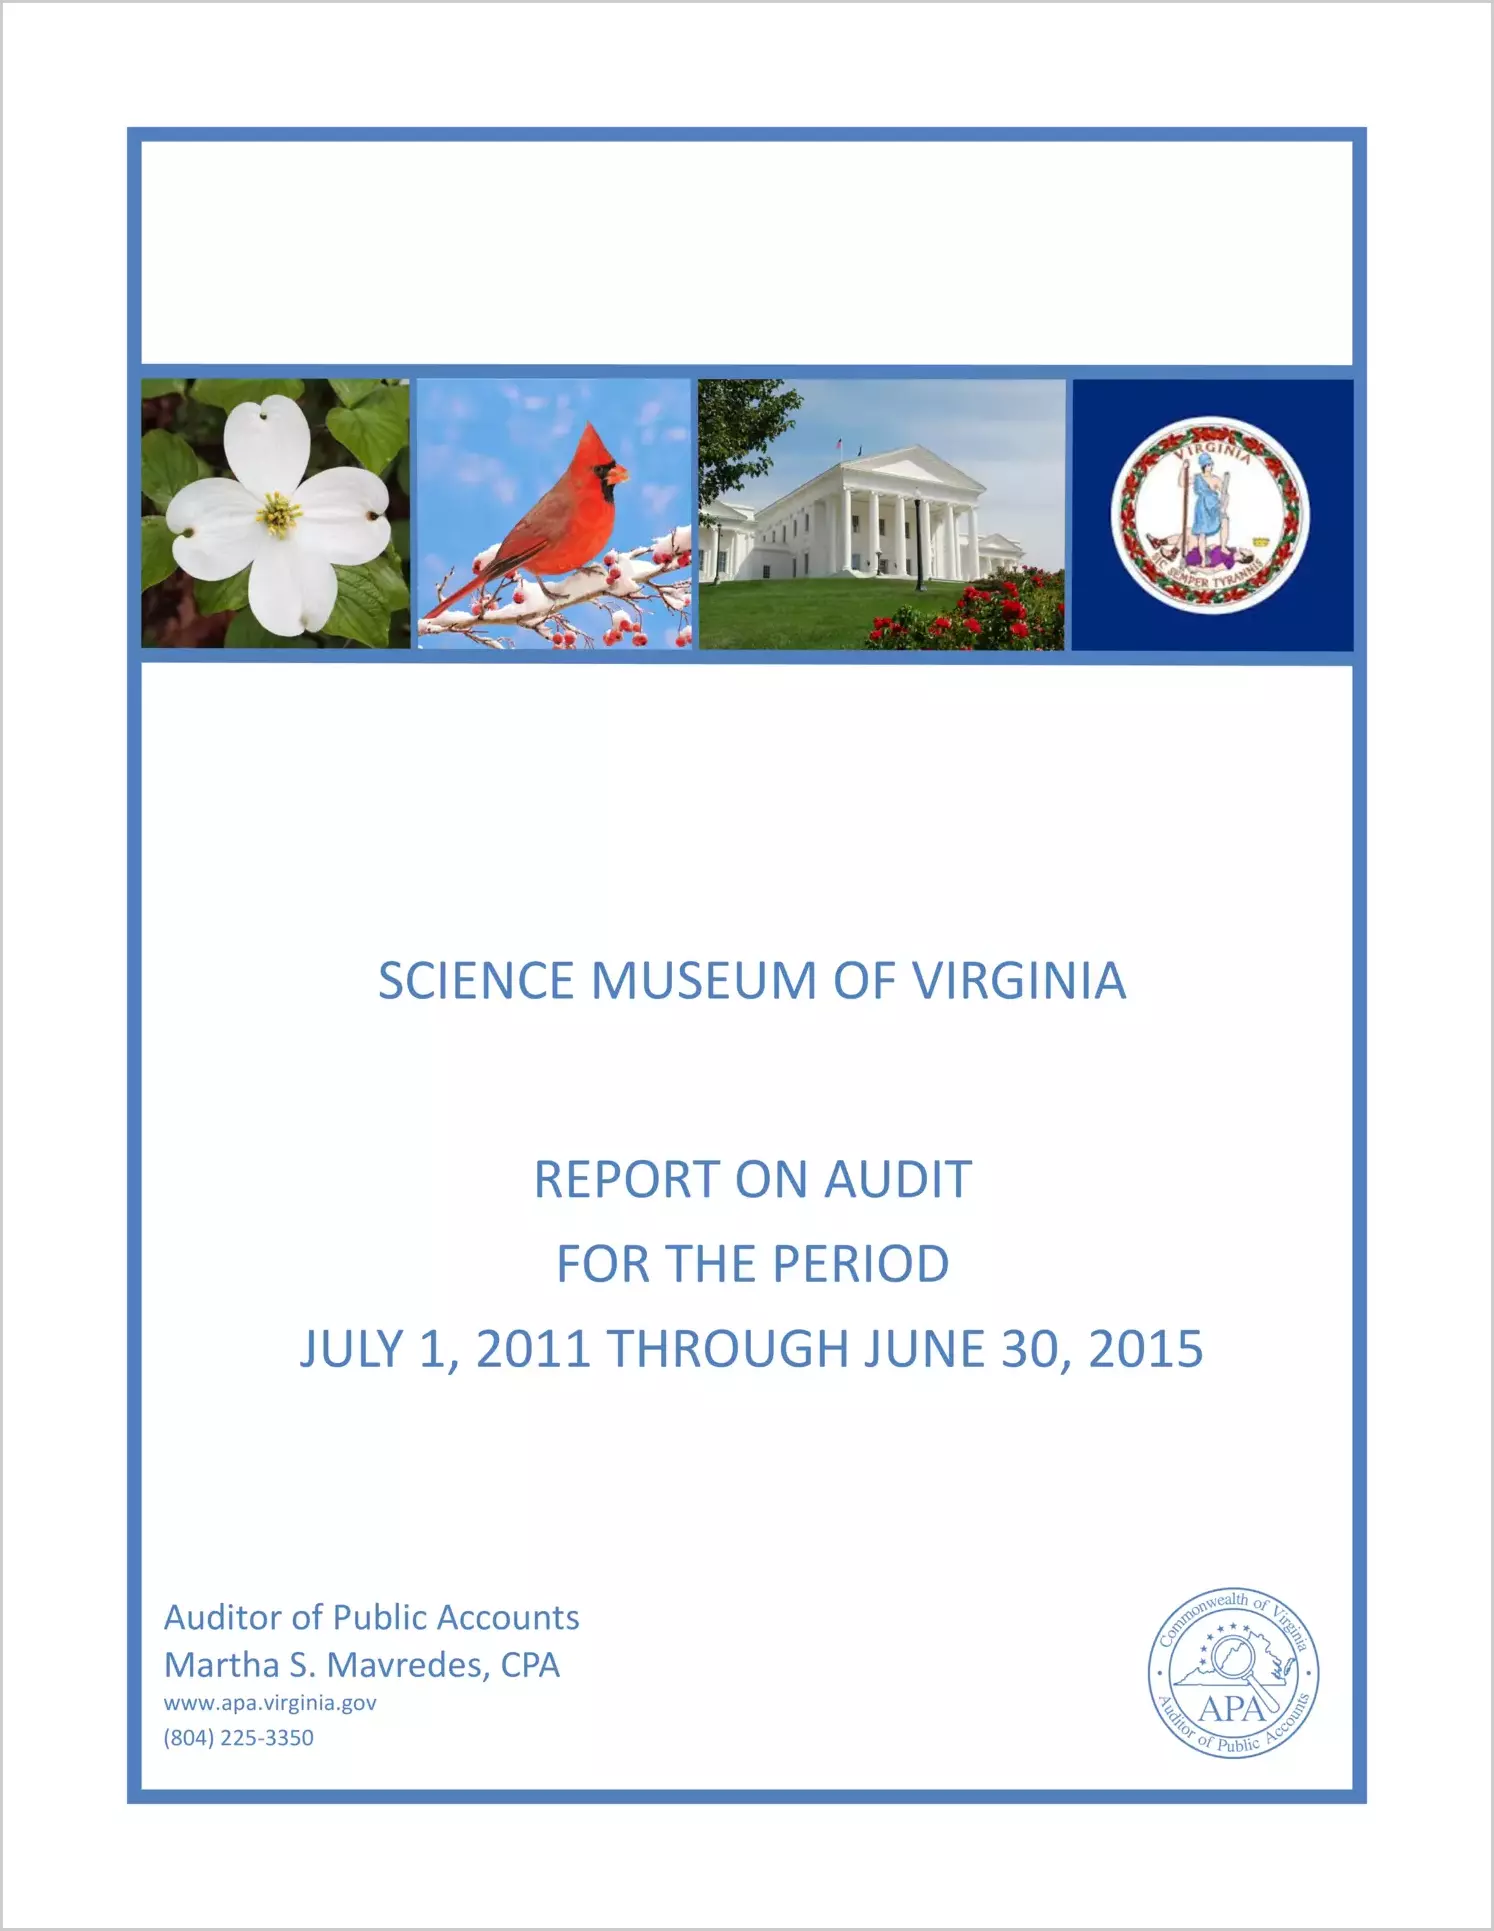 Science Museum of Virginia Report on Audit for the Period July 1, 2011 through June 30, 2015